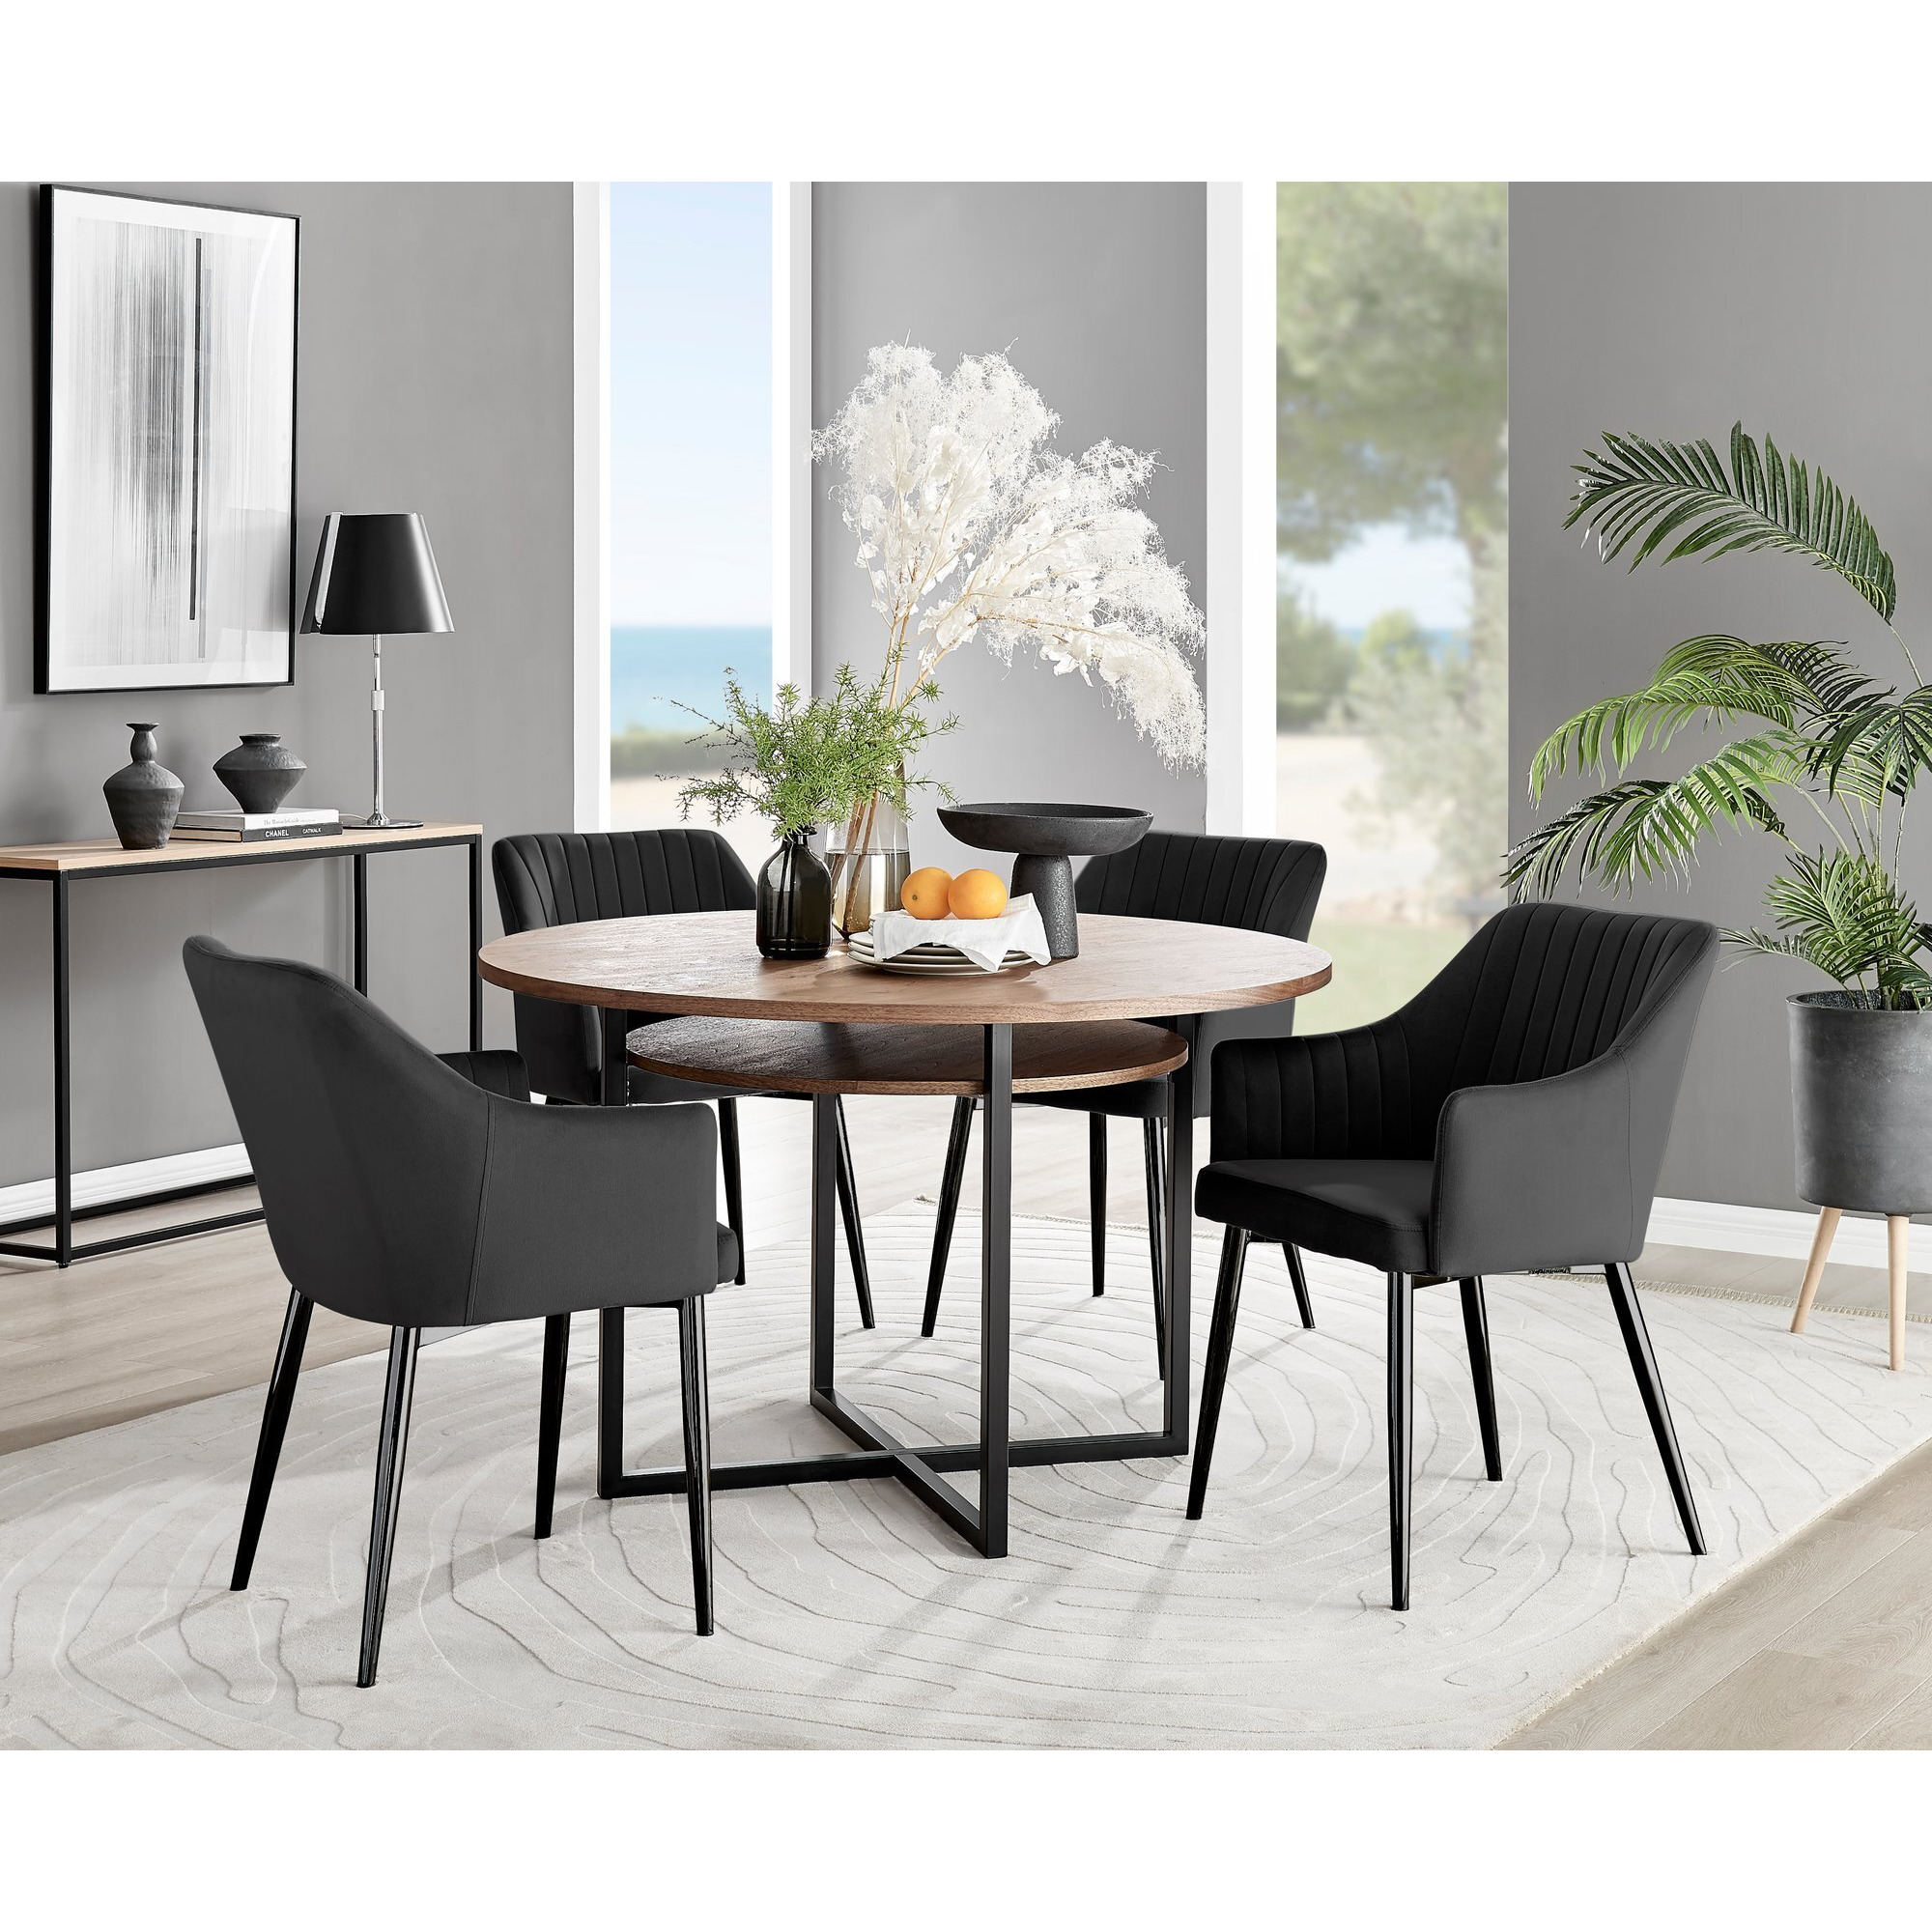 Adley Brown Wood Storage Dining Table & 4 Calla Black Leg Chairs